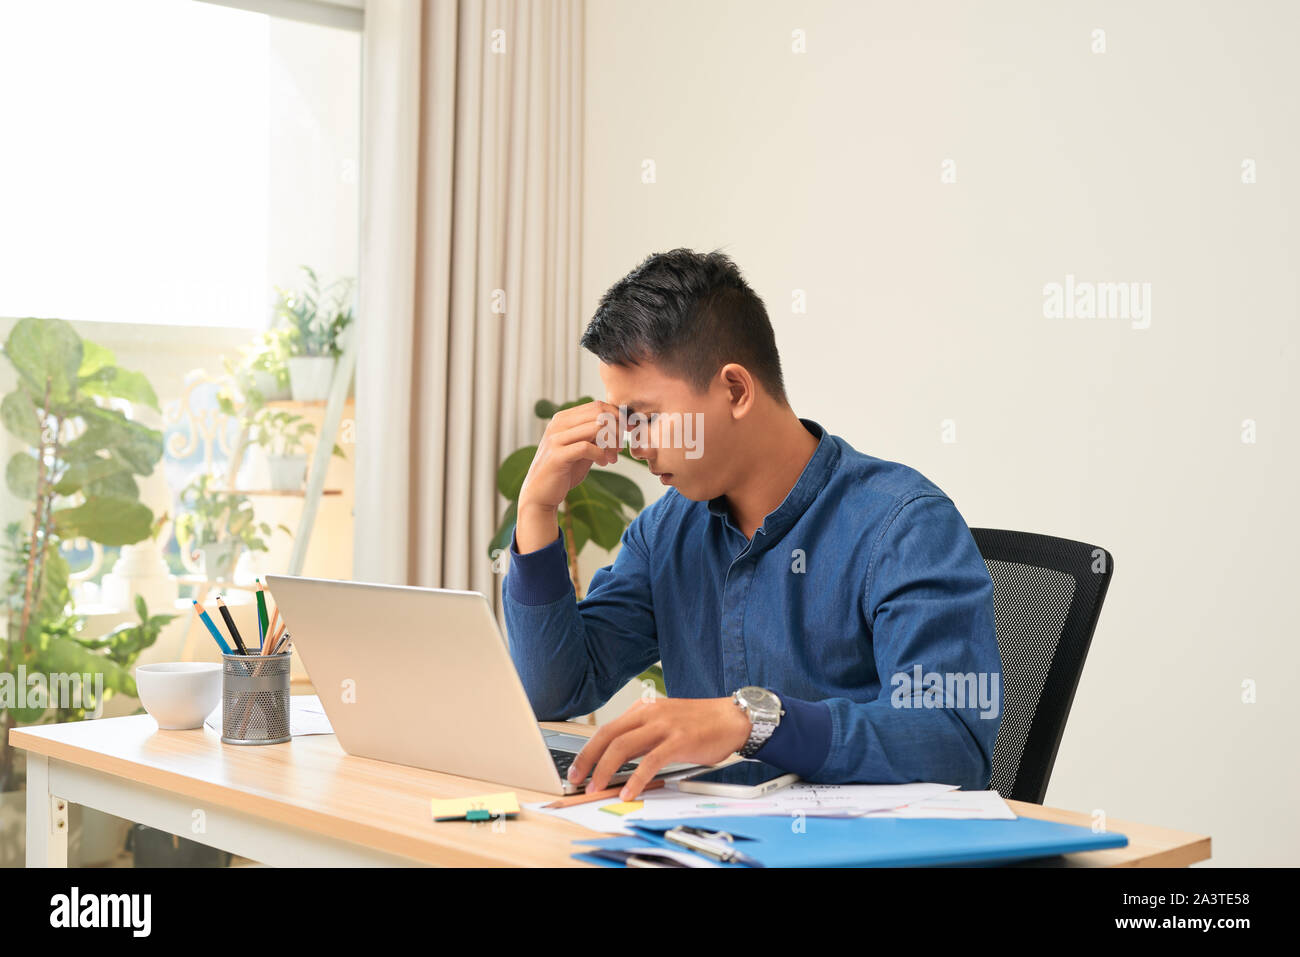 business, people and work concept - tired businessman in his office Stock Photo